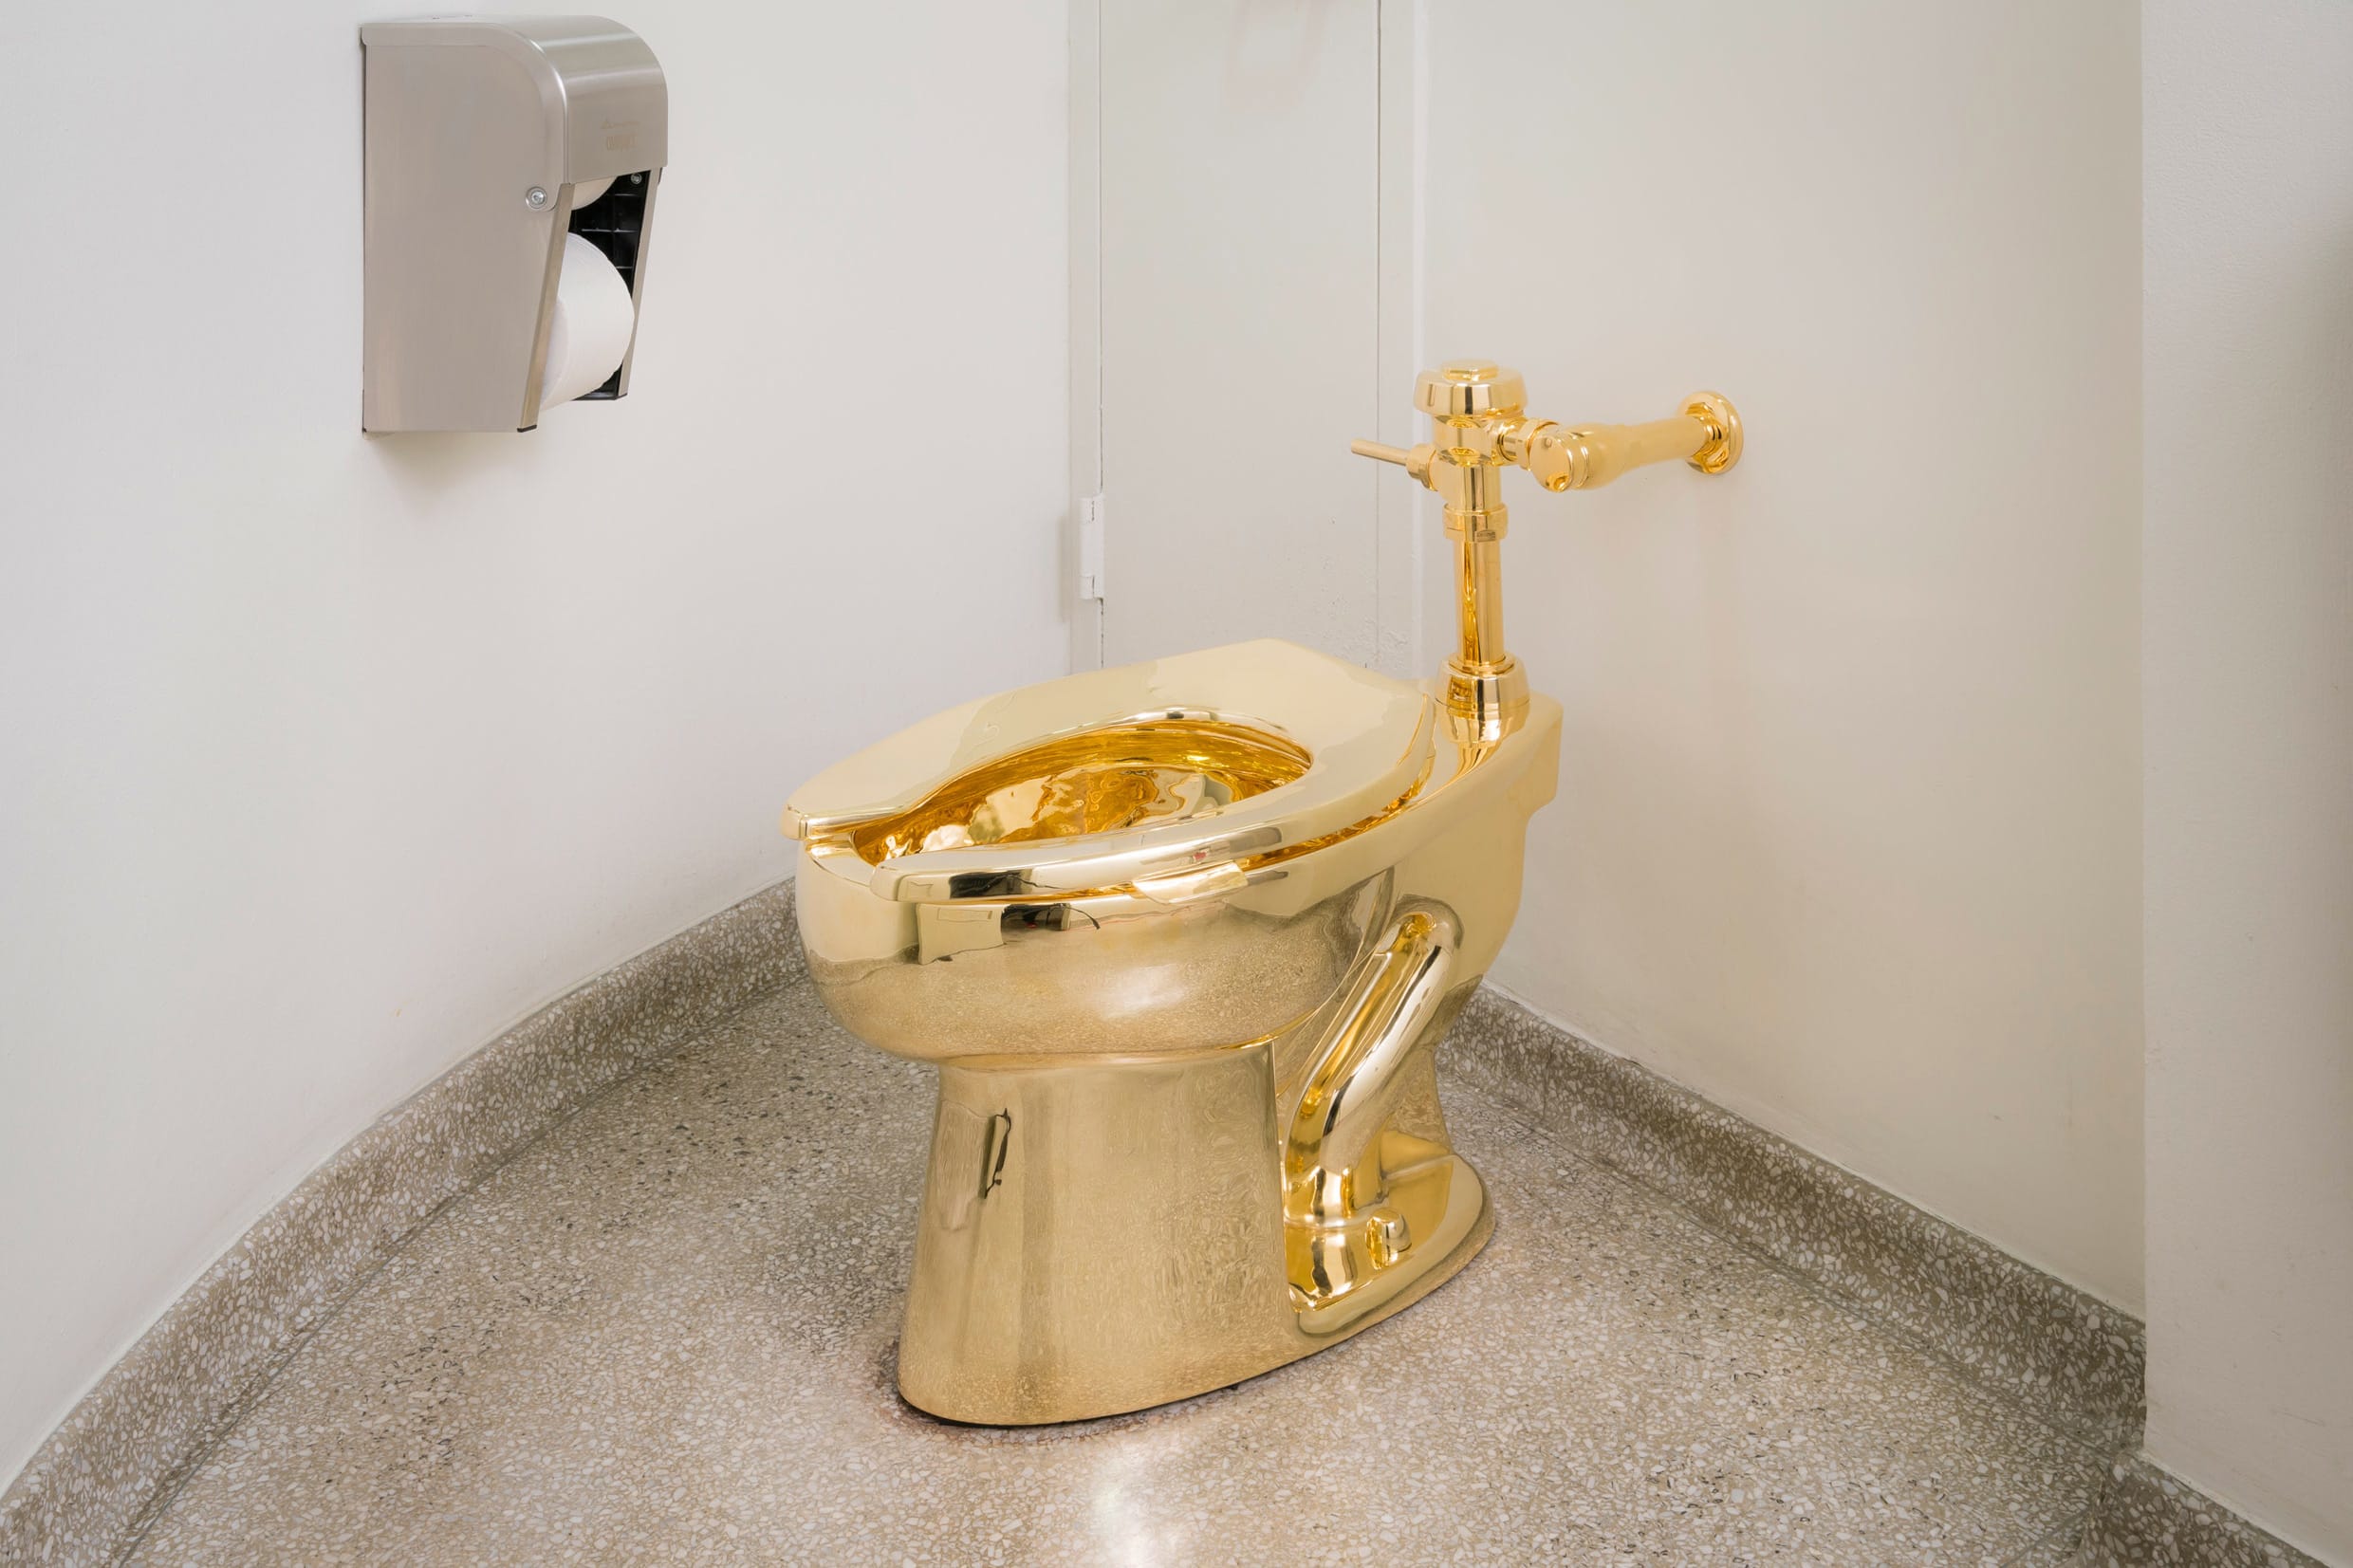 18K Gold Toilet America by Maurizio 